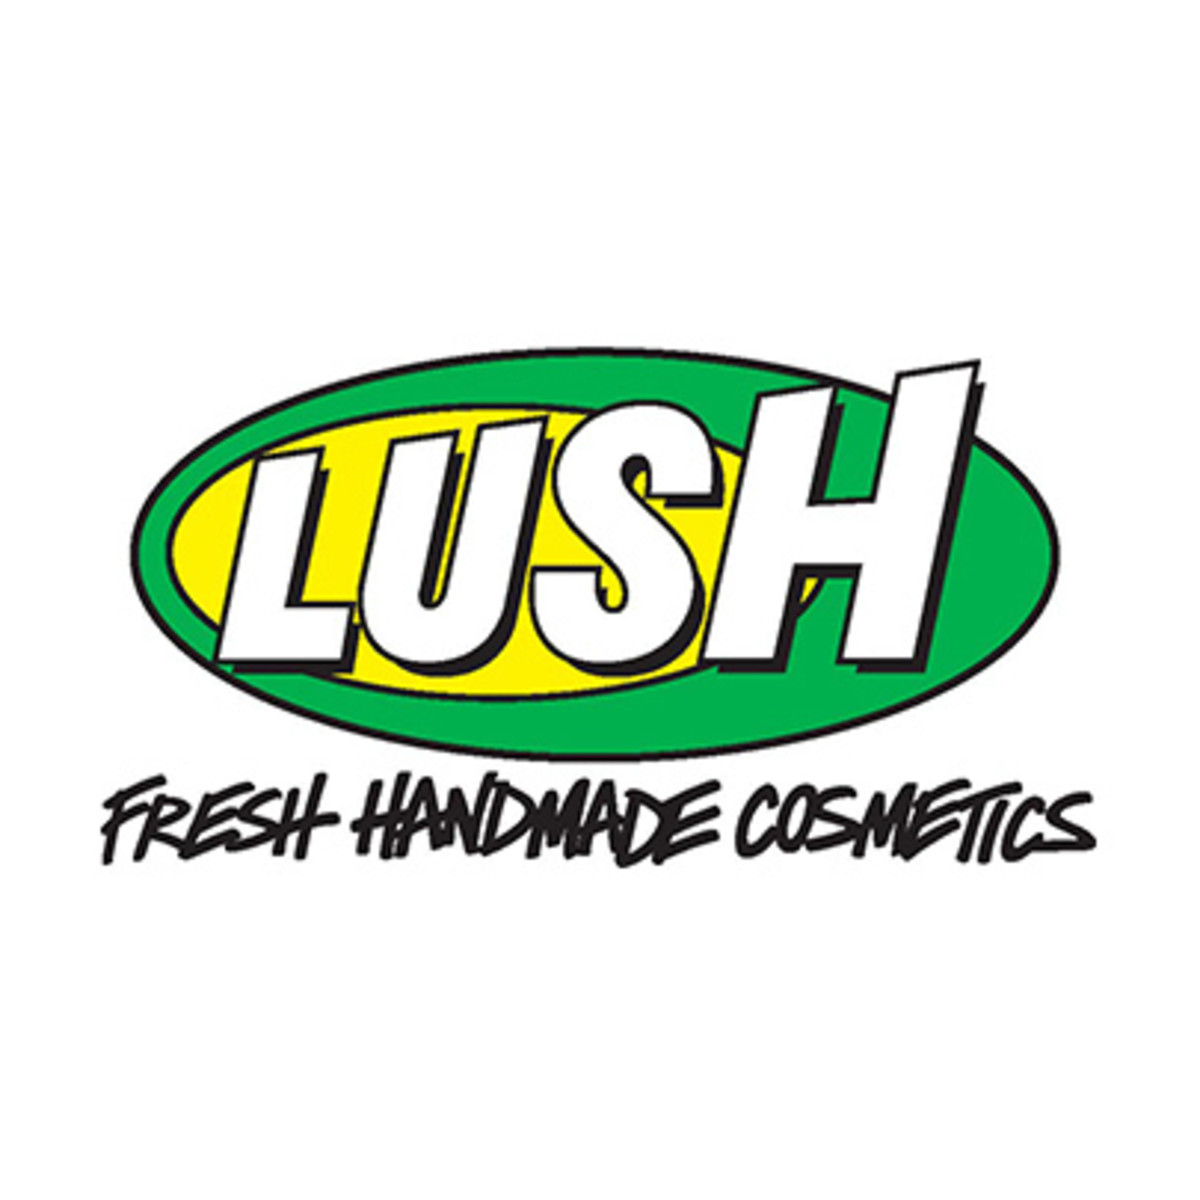 Lush boasts that its entire product line is 100% organic, vegetarian, and handmade.